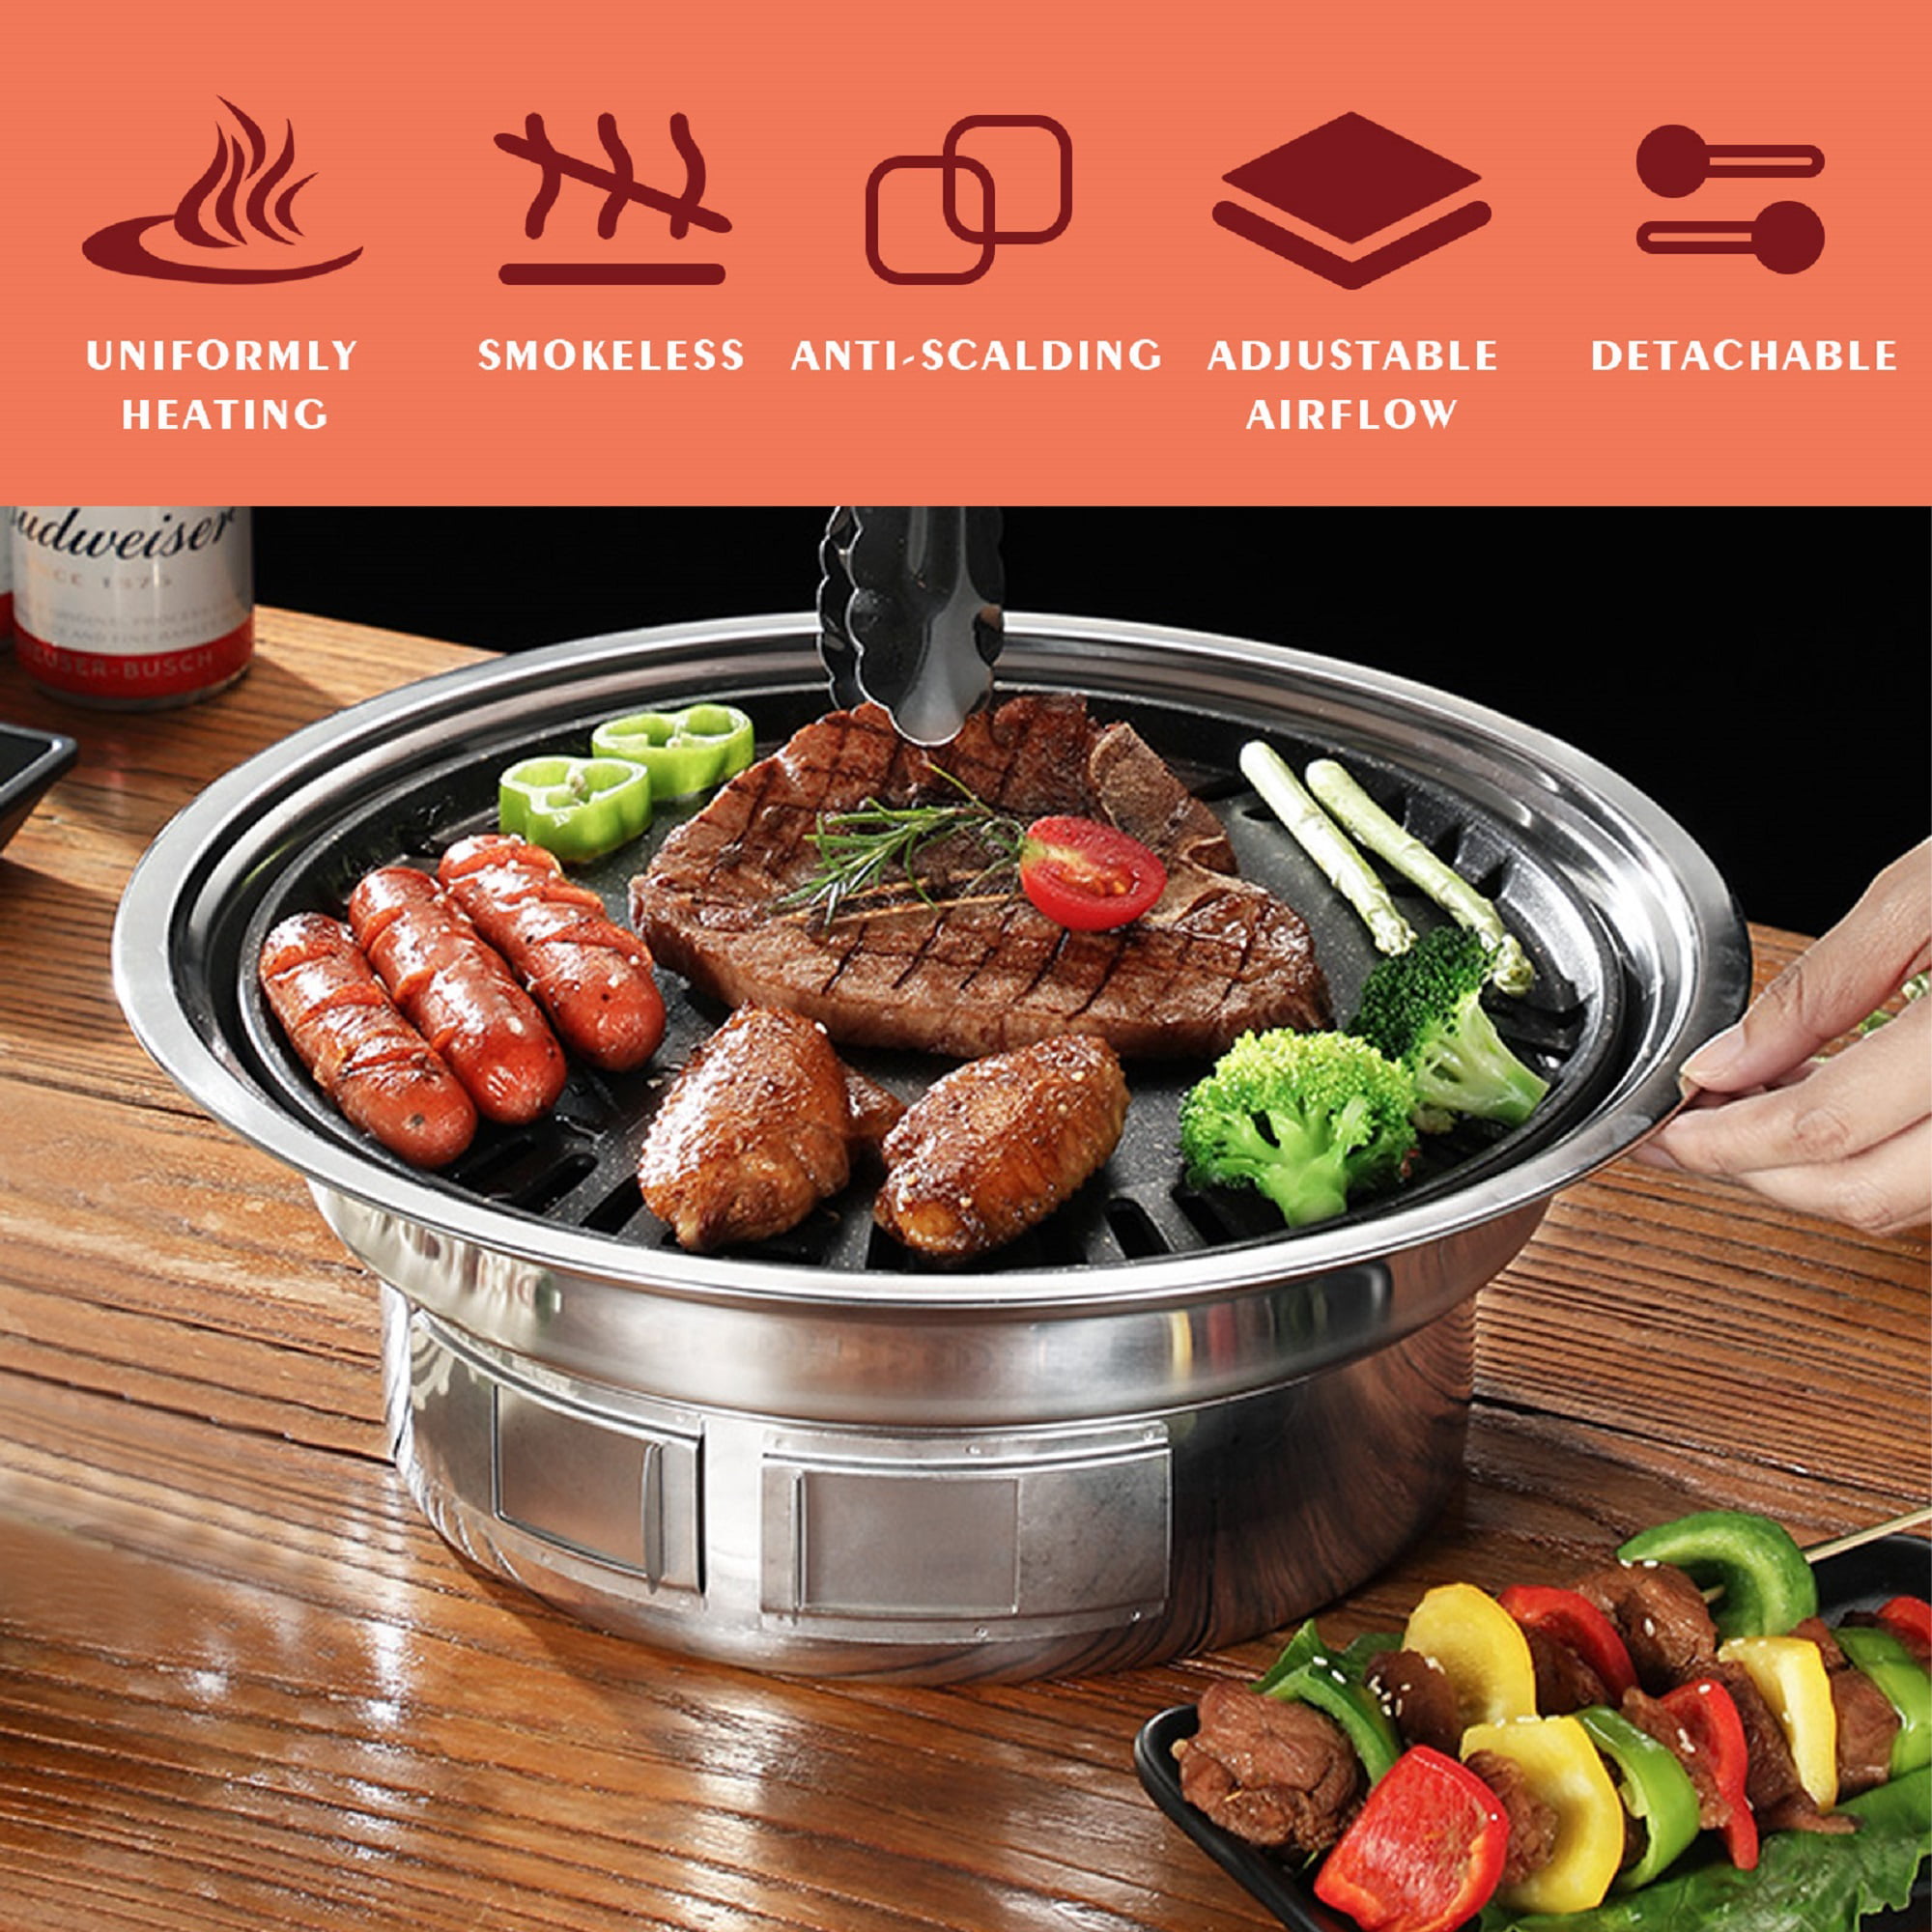 Baffect RNAB091378VDX baffect bbq charcoal grill, 13.7 inch non-stick  stainless steel korean barbecue grill, portable charcoal stove for outdoors  c